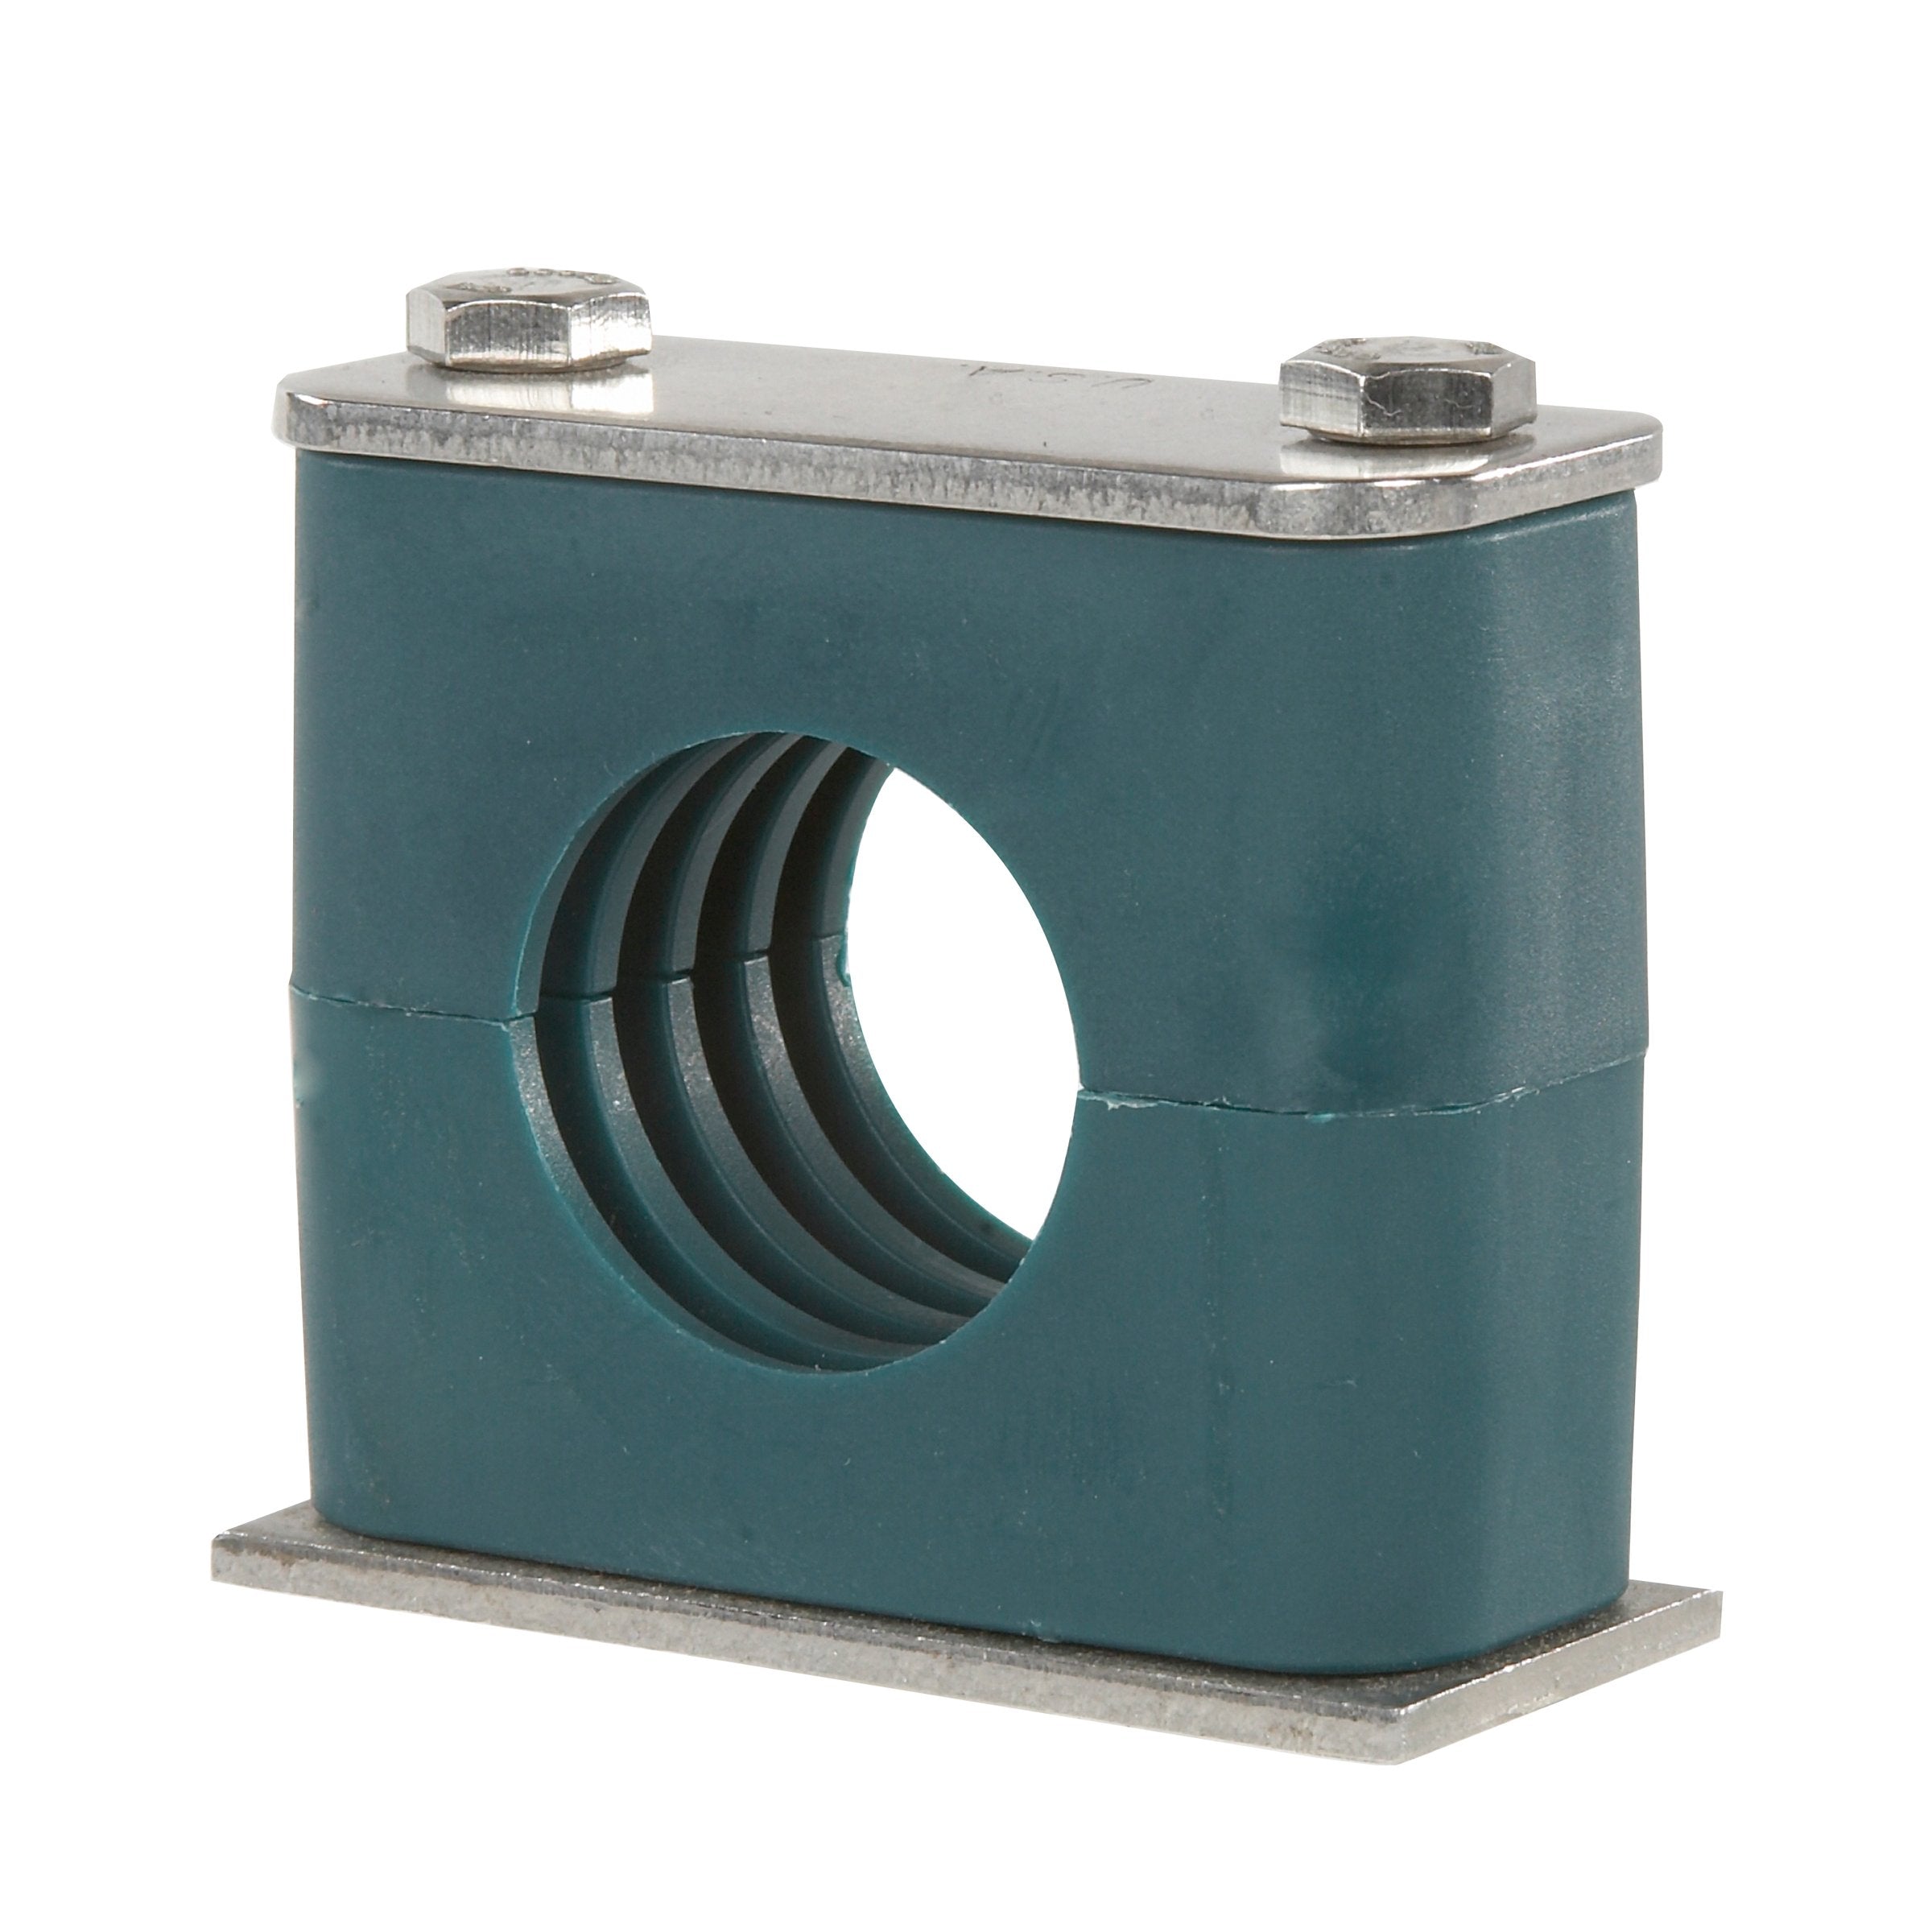 SP-106.4A-PP-DP-AS-U-W5 : Stauff Clamp, Single Weld Plate, 0.25 inch (6.4mm) OD, for 1/4" Tube, Green PP Insert, Profiled Interior, 316SS